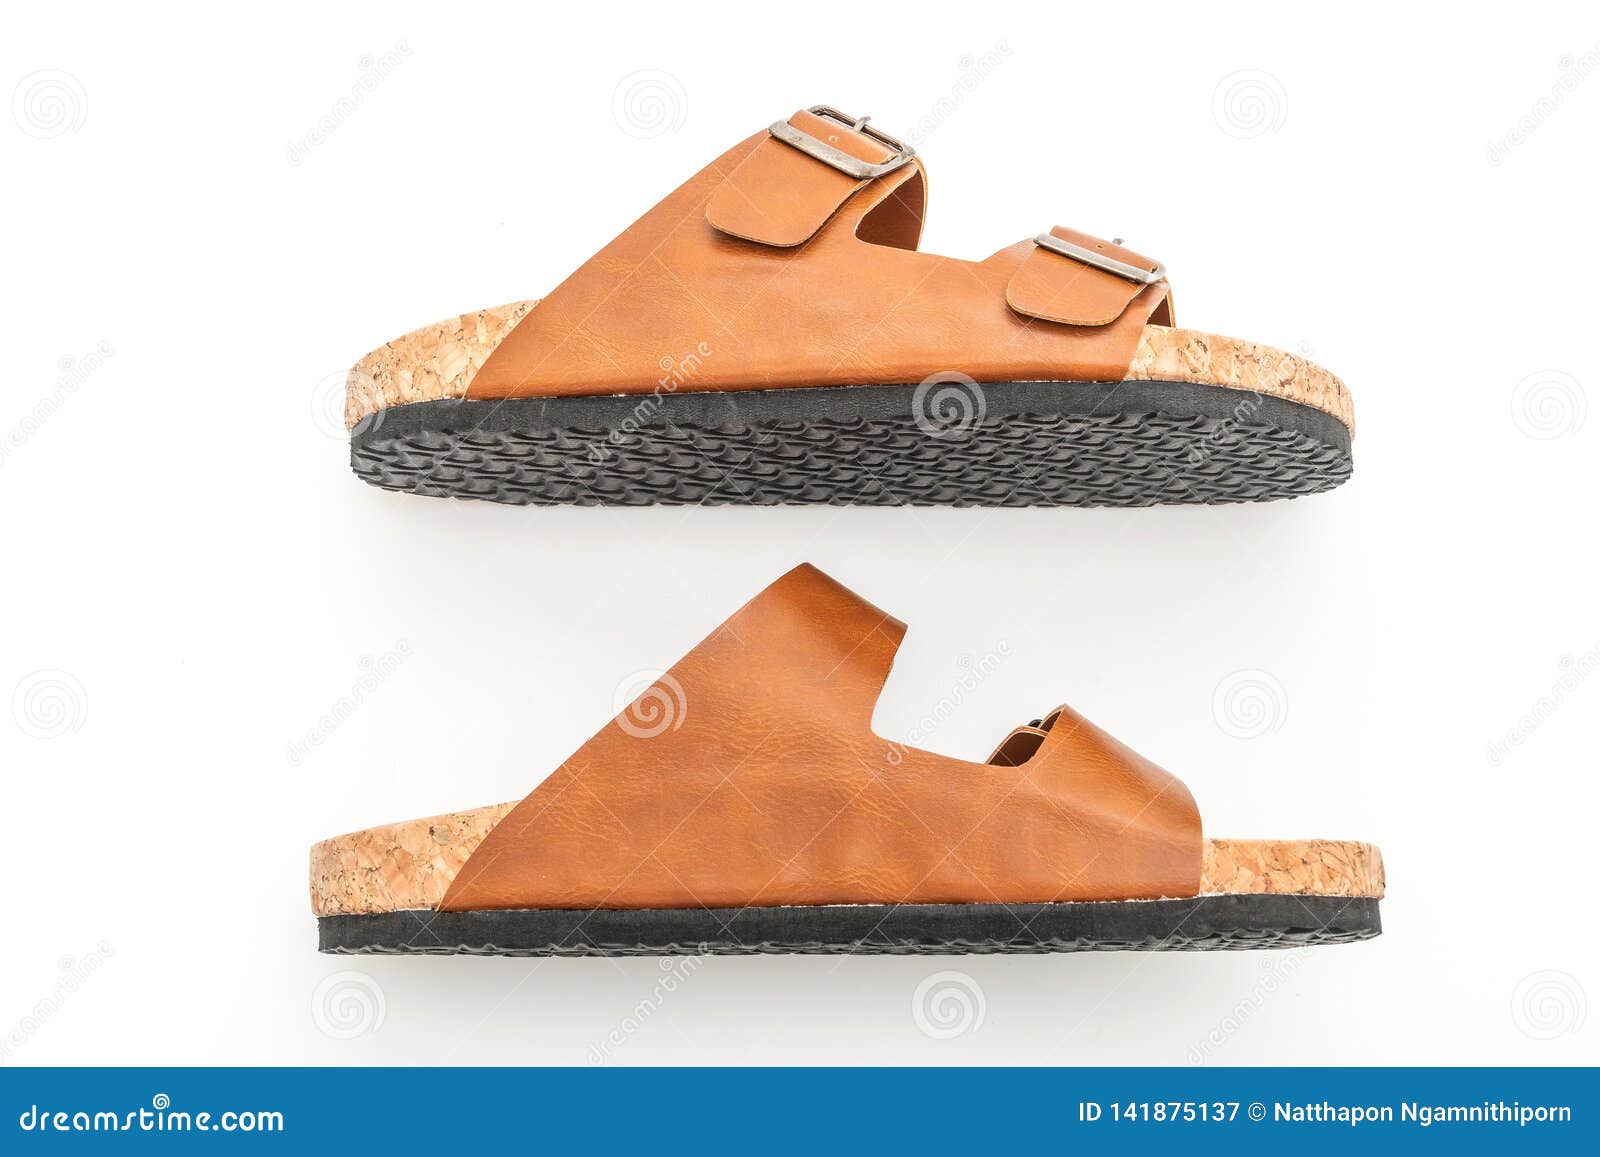 Men S and Women S (unisex) Fashion Leather Sandals Stock Image - Image ...